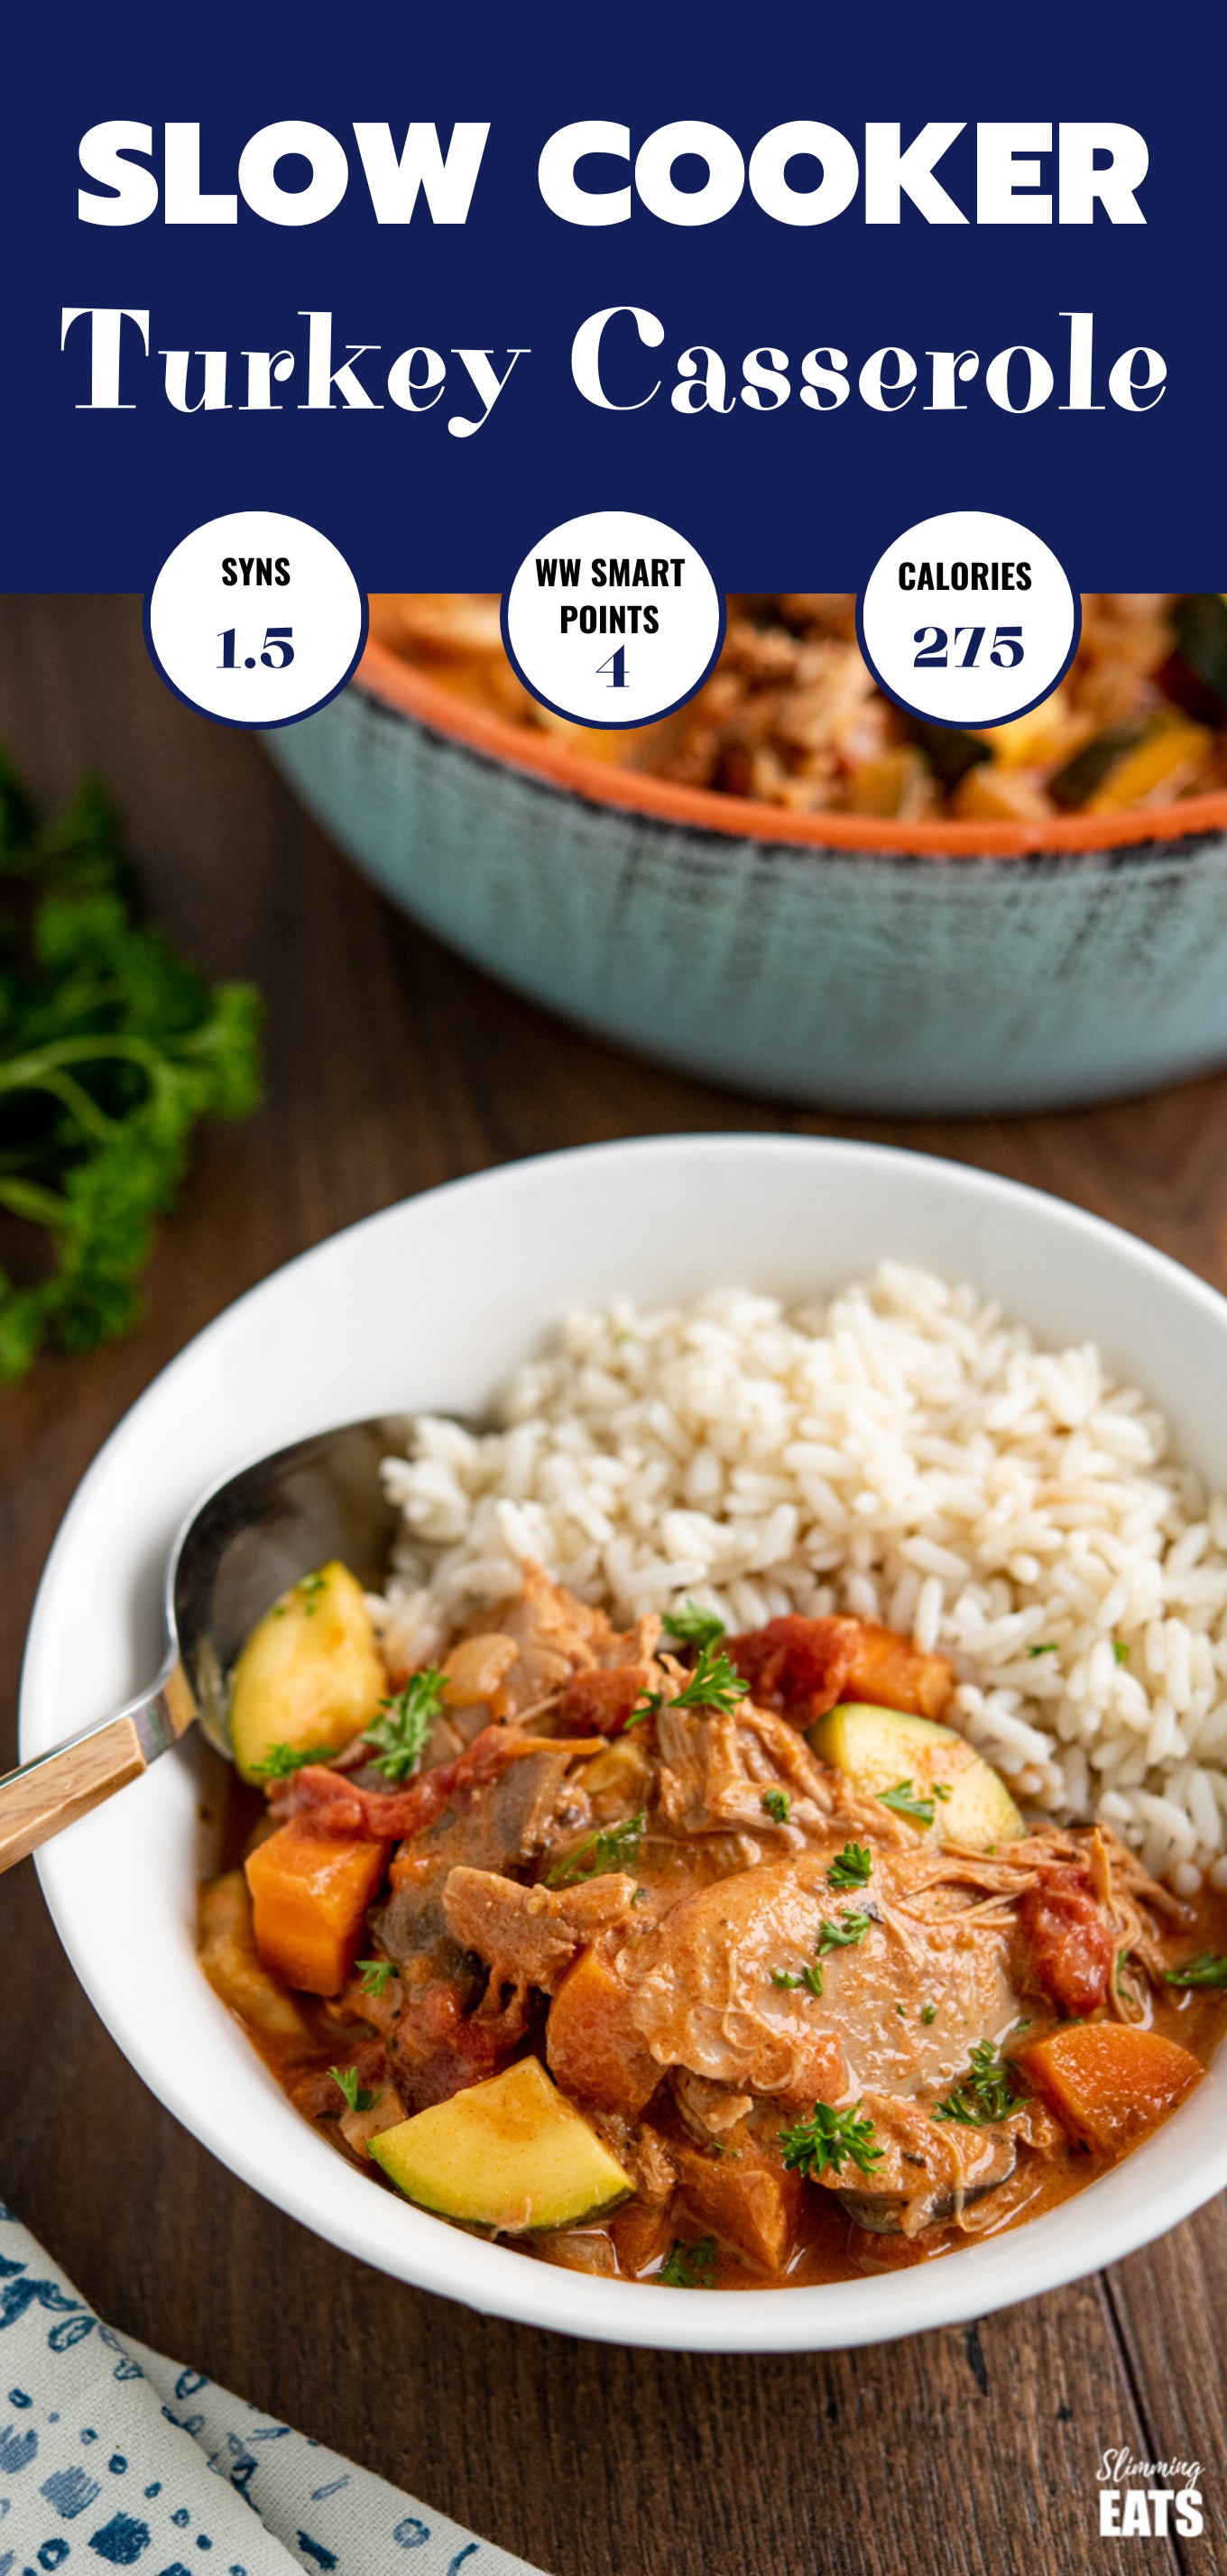  slow cooker creamy tomato and turkey casserole featured pin image